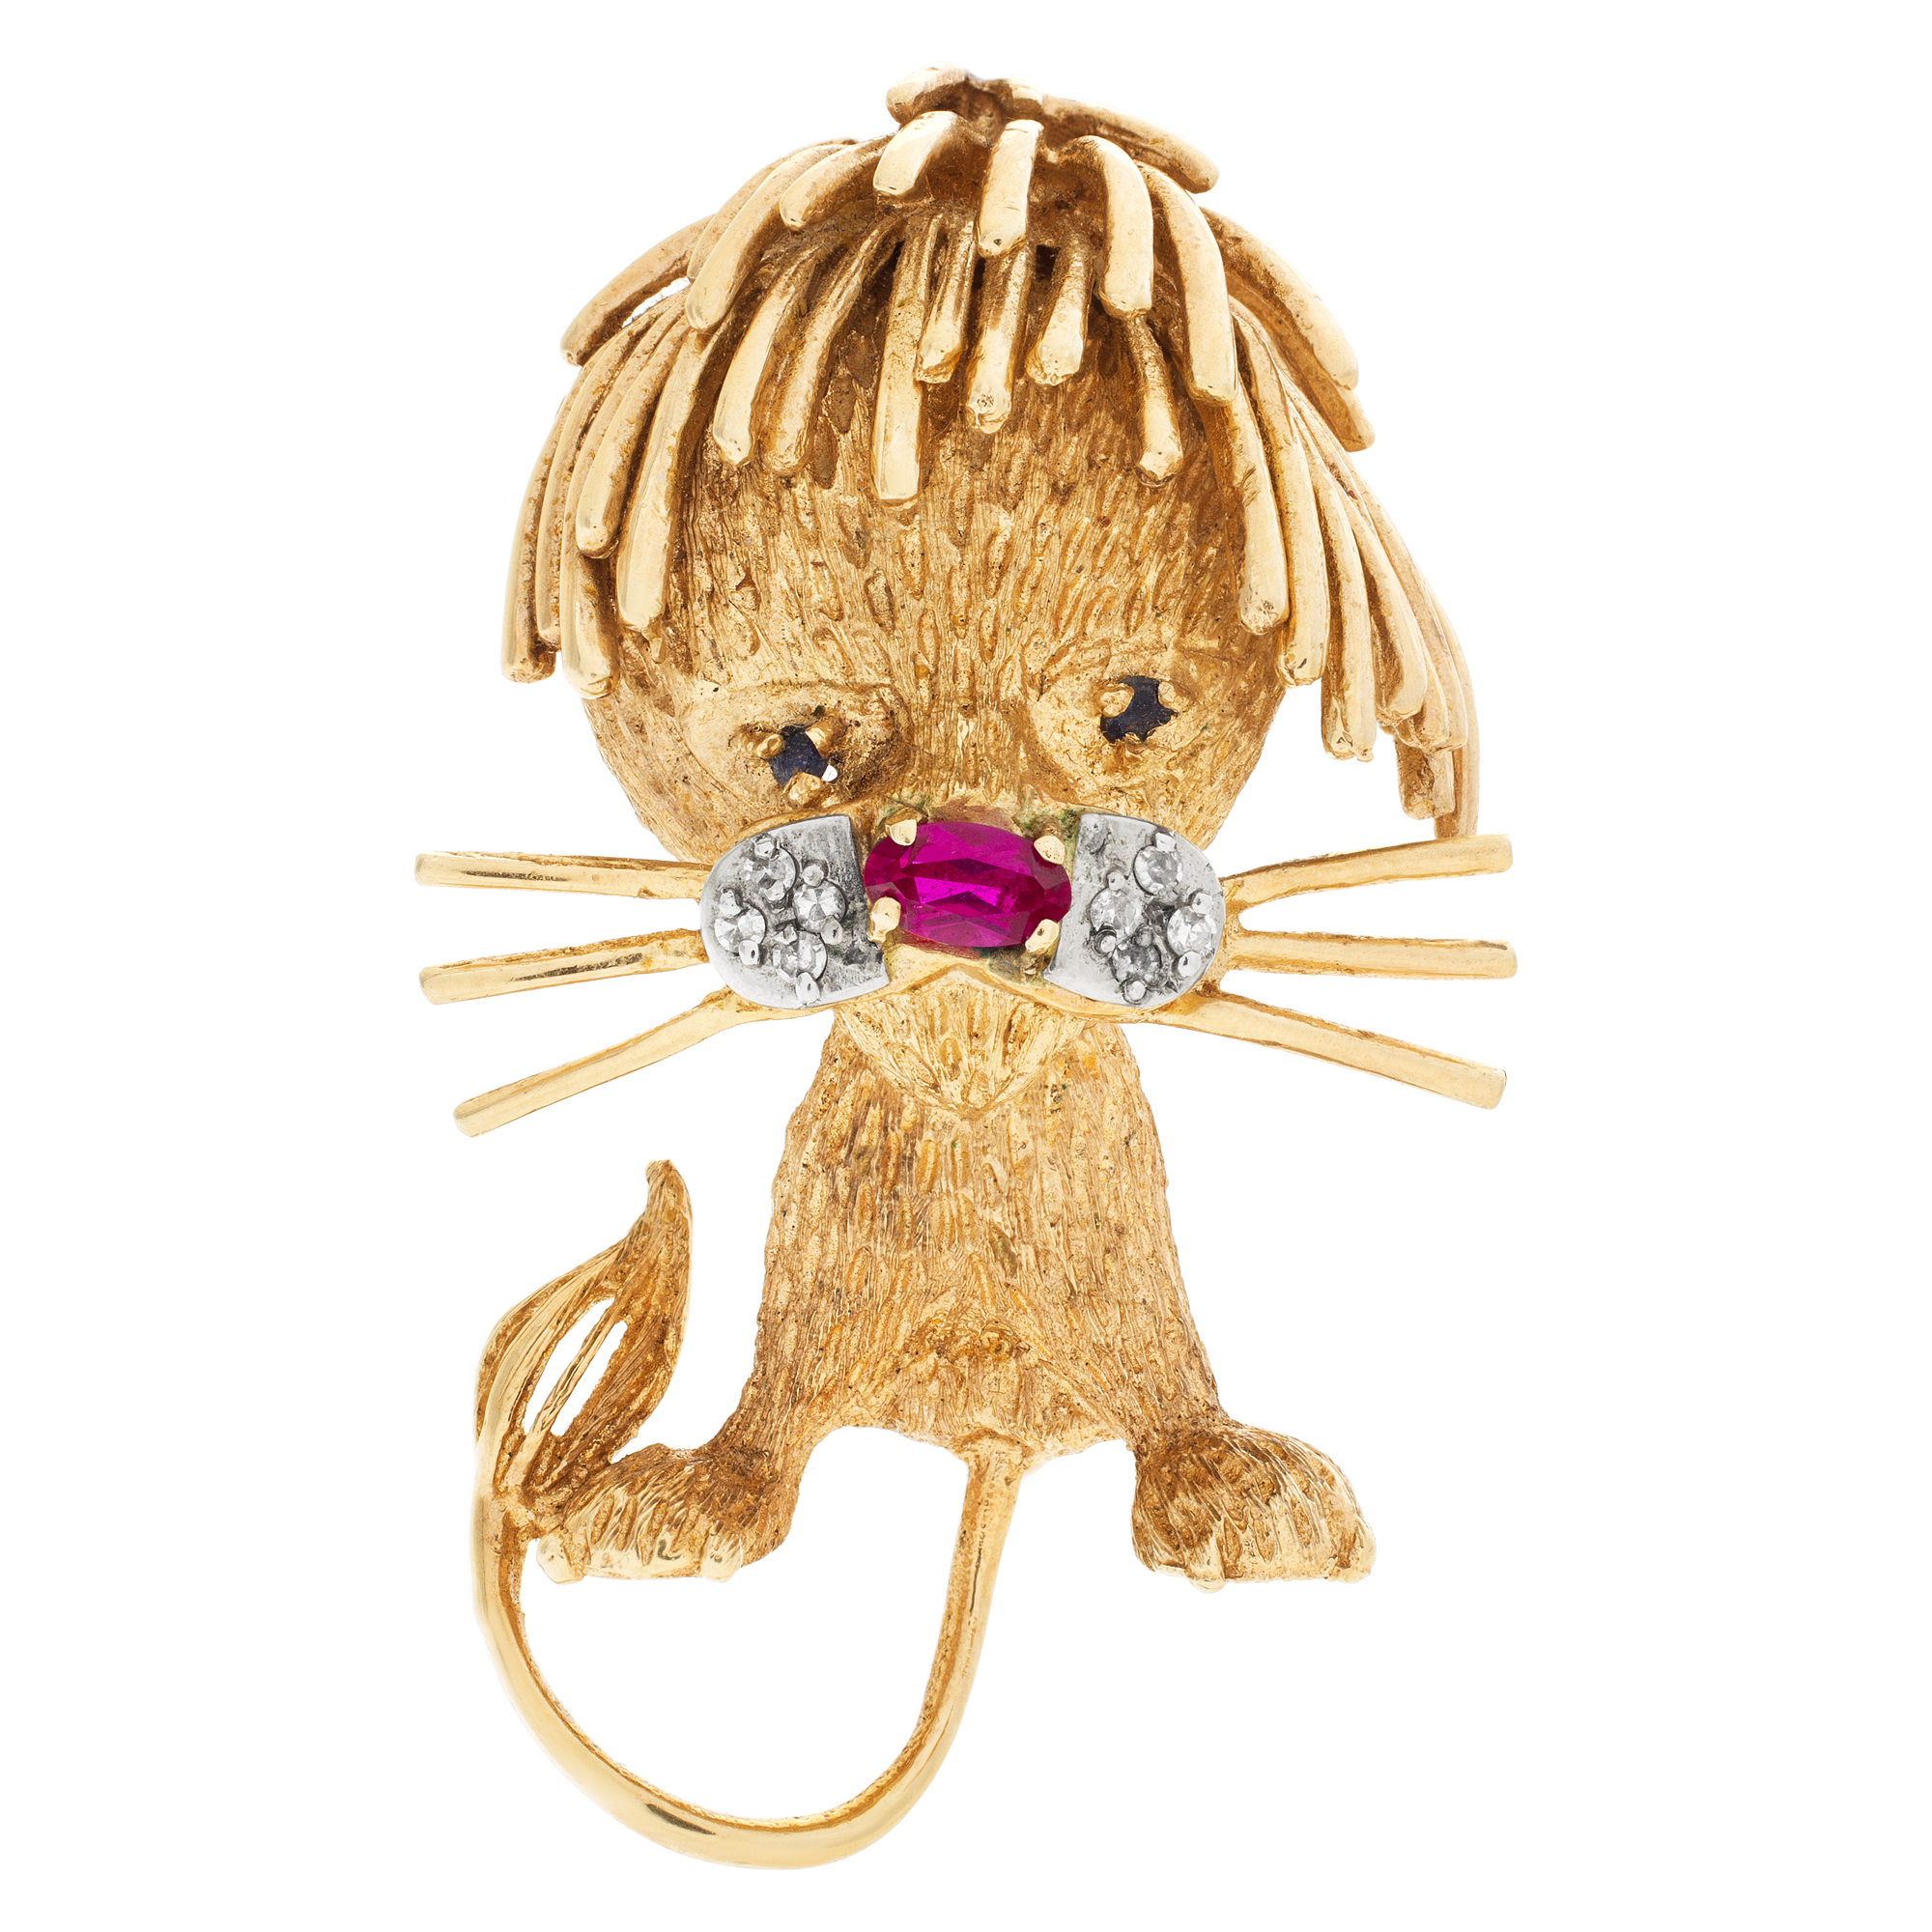 Fancy lion cub brooch in 14k with an oval ruby nose, diamond whiskers and emerald eyes.